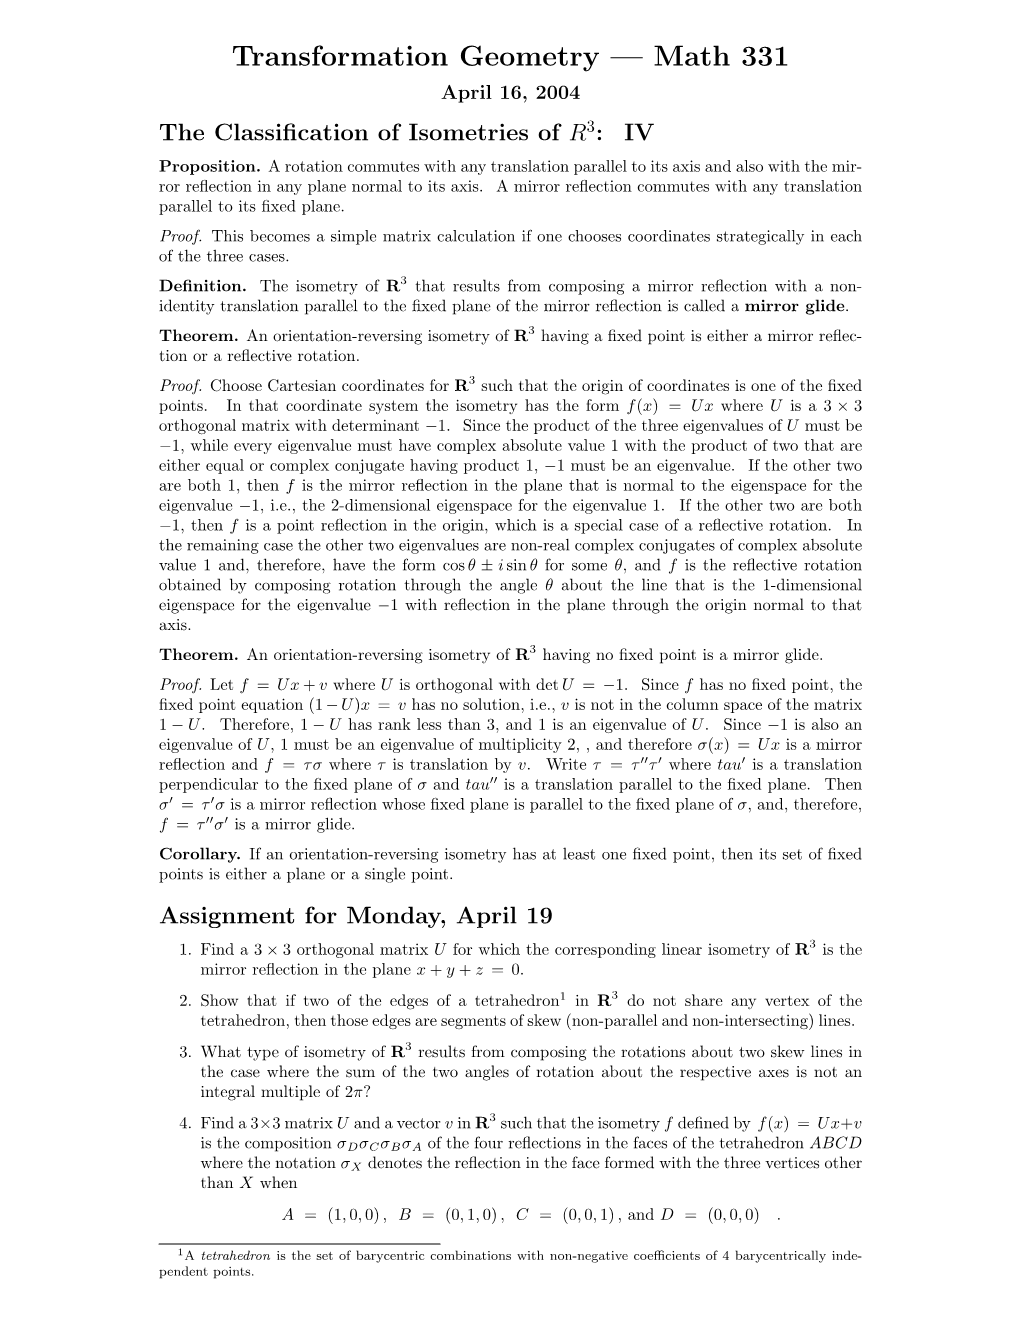 Transformation Geometry — Math 331 April 16, 2004 the Classiﬁcation of Isometries of R3: IV Proposition